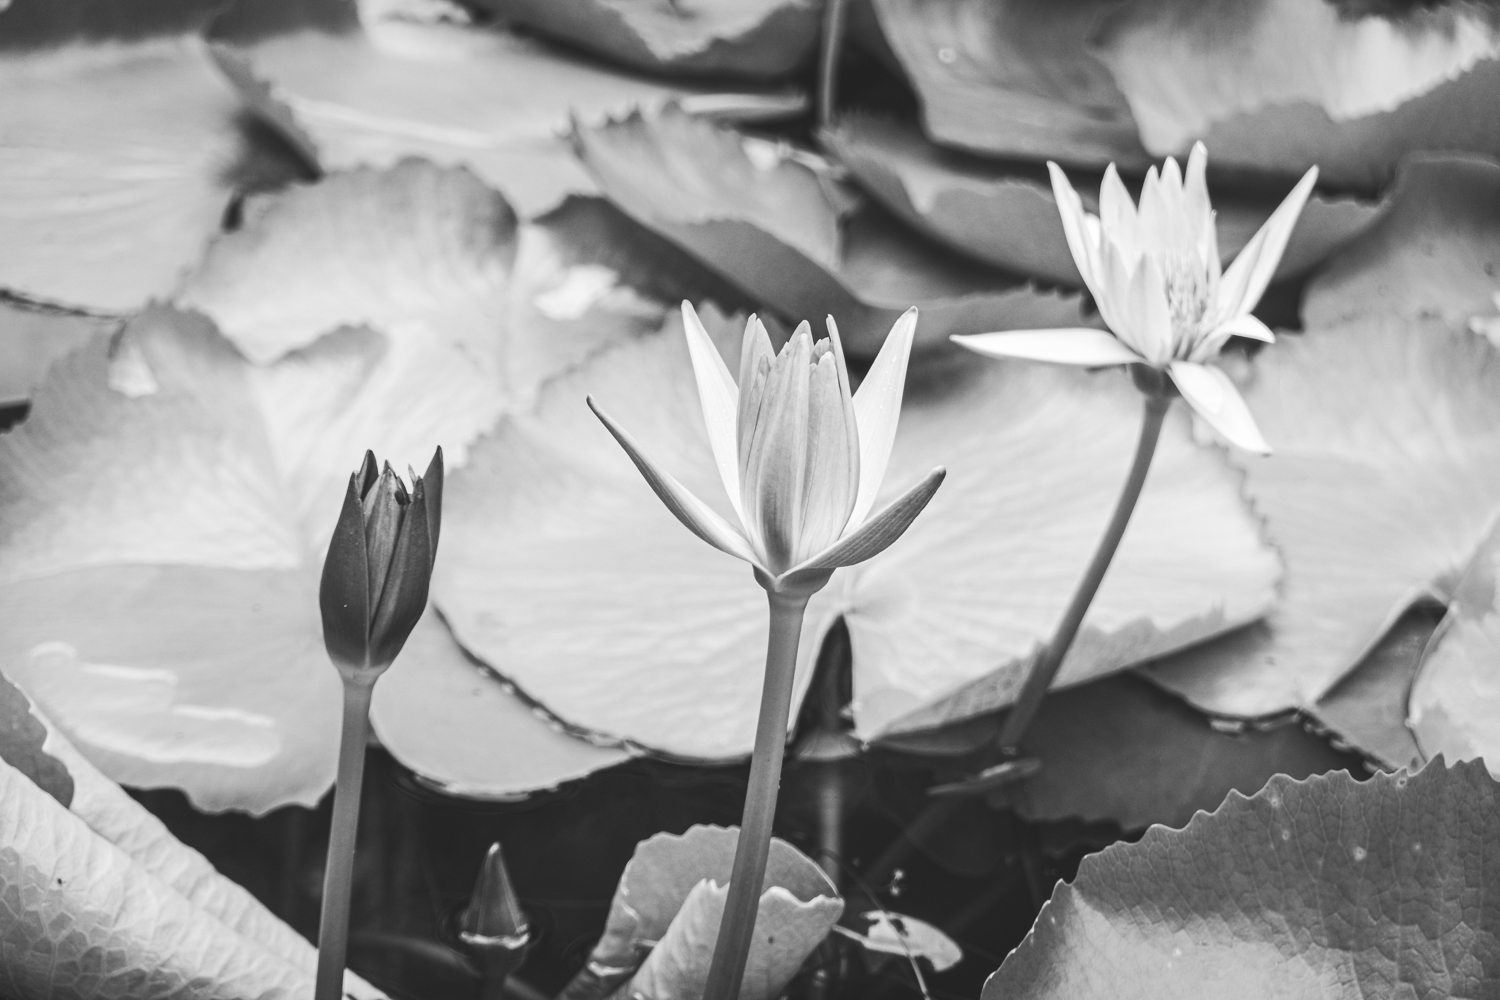 Lotus the most sacred flowers in stages of blooming black and white photograph